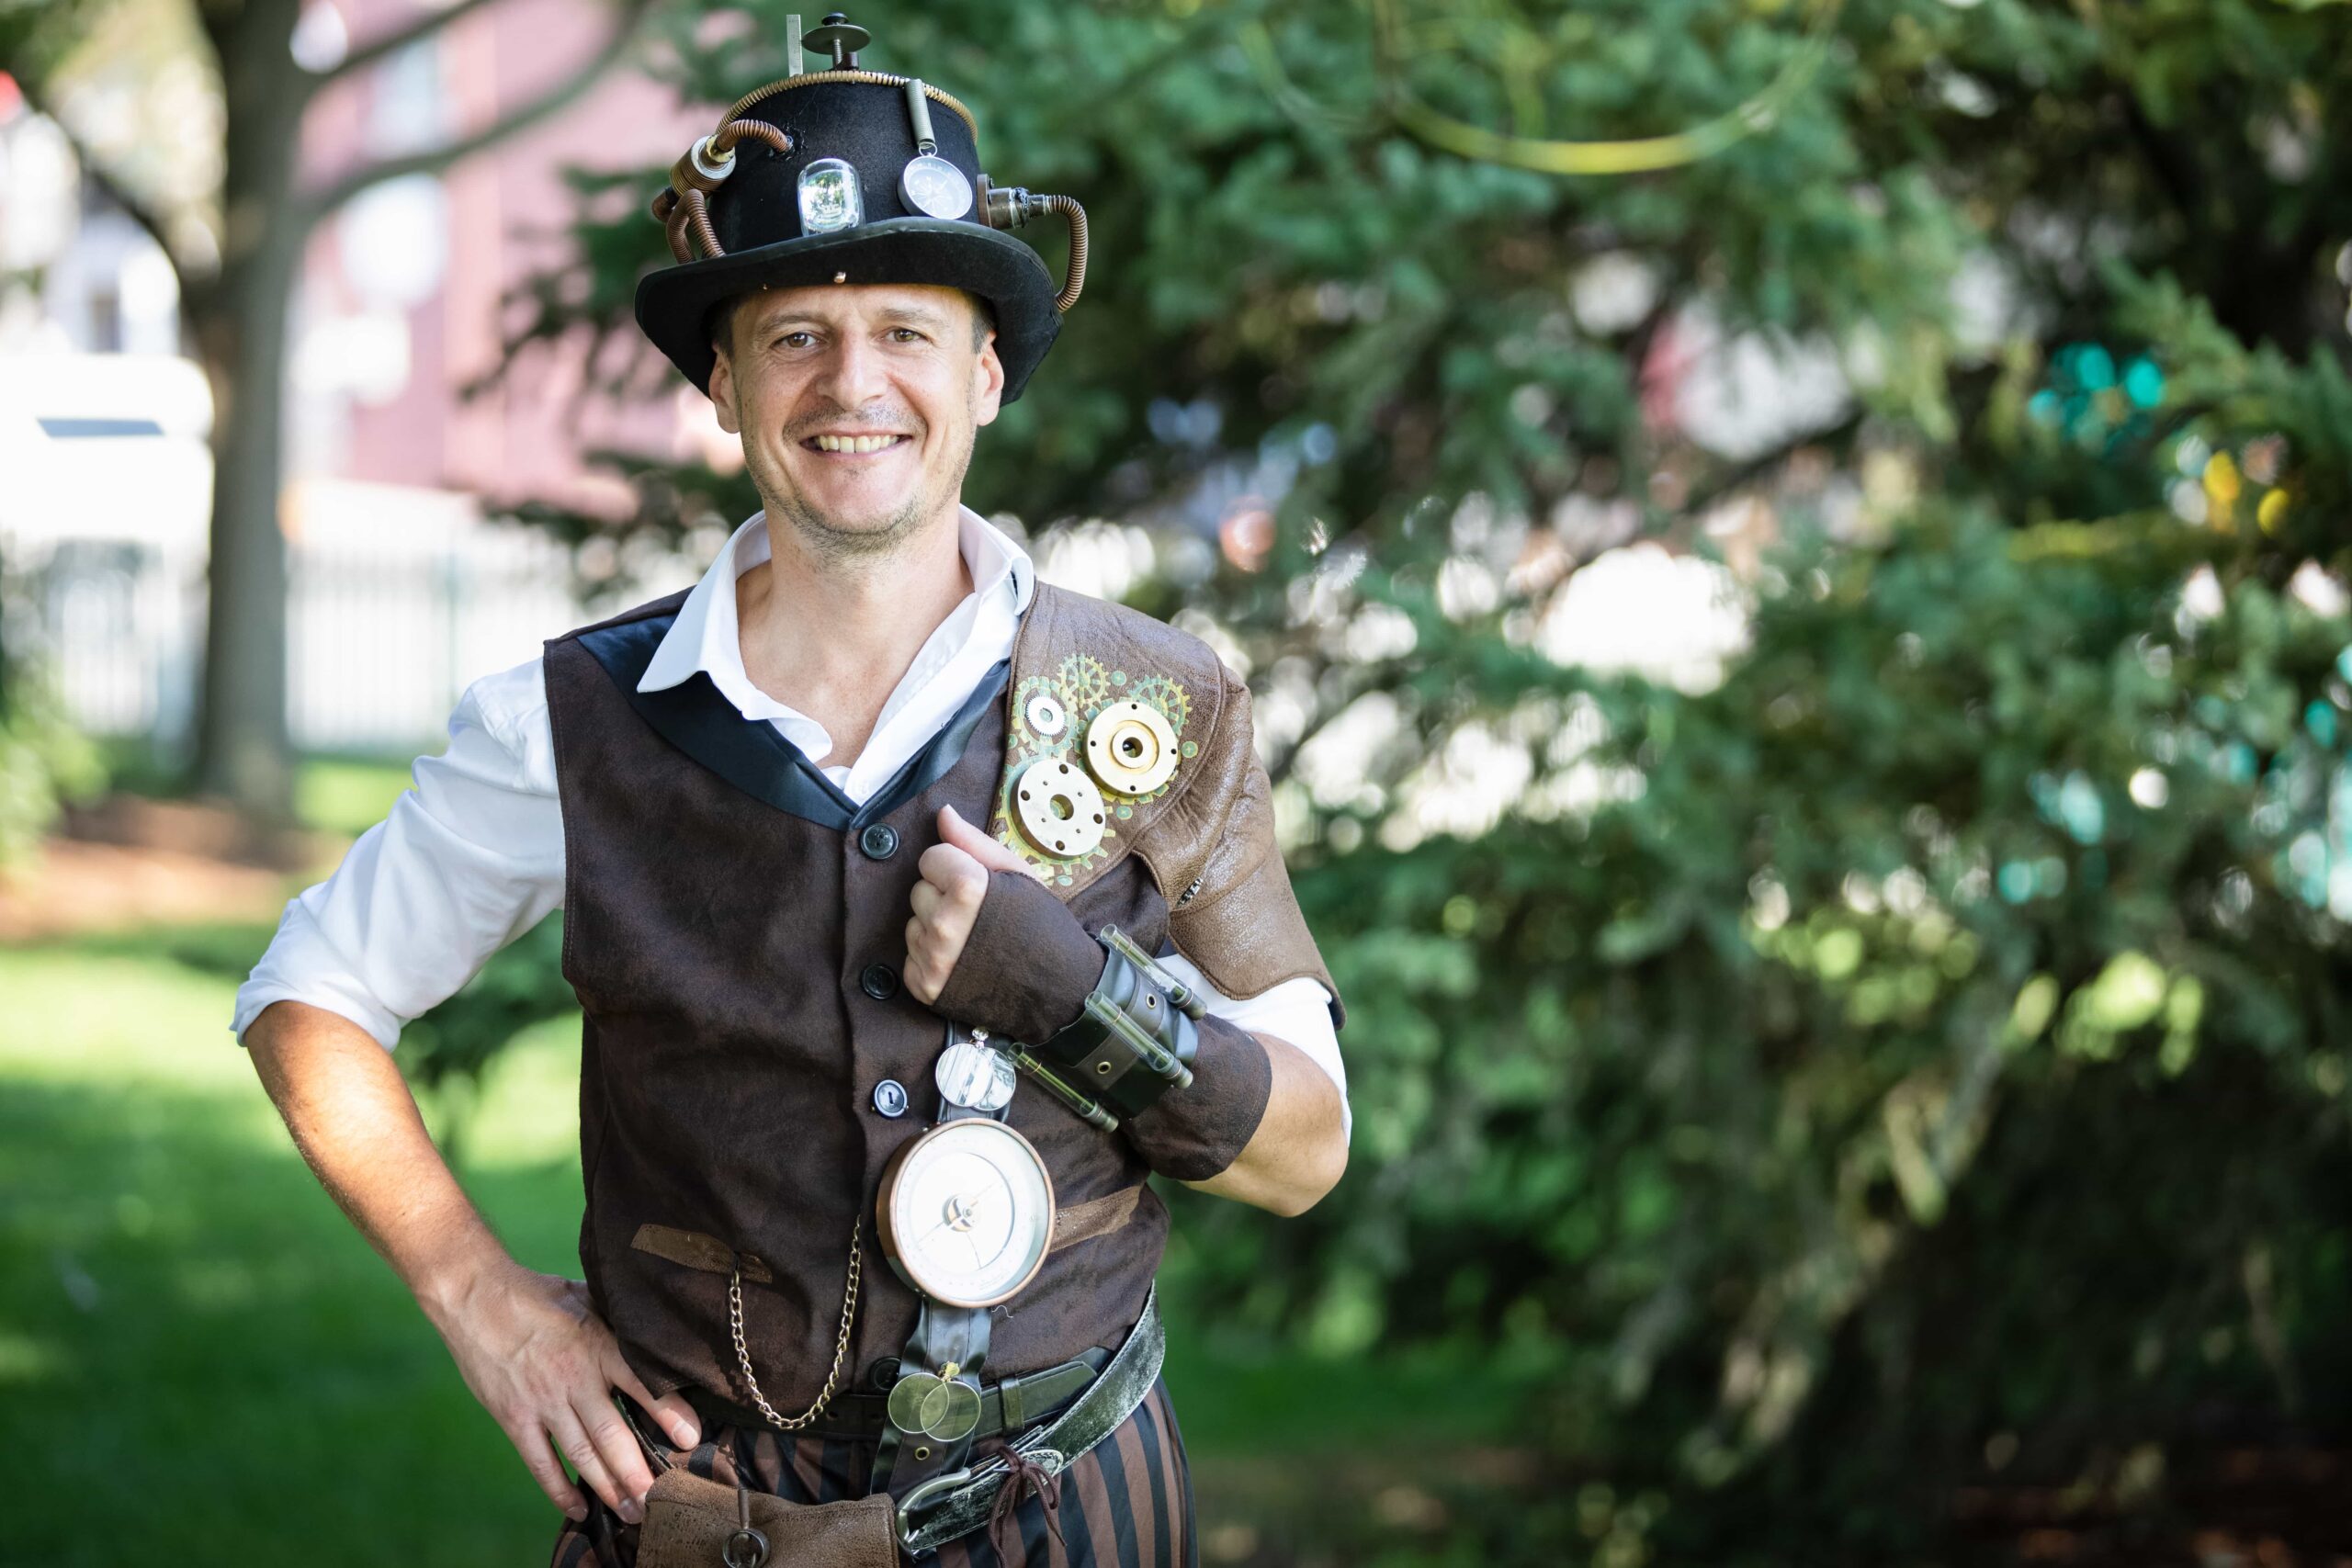 Amherstburg's mayor shows off his Steampunk costume at the Uncommon Festival.